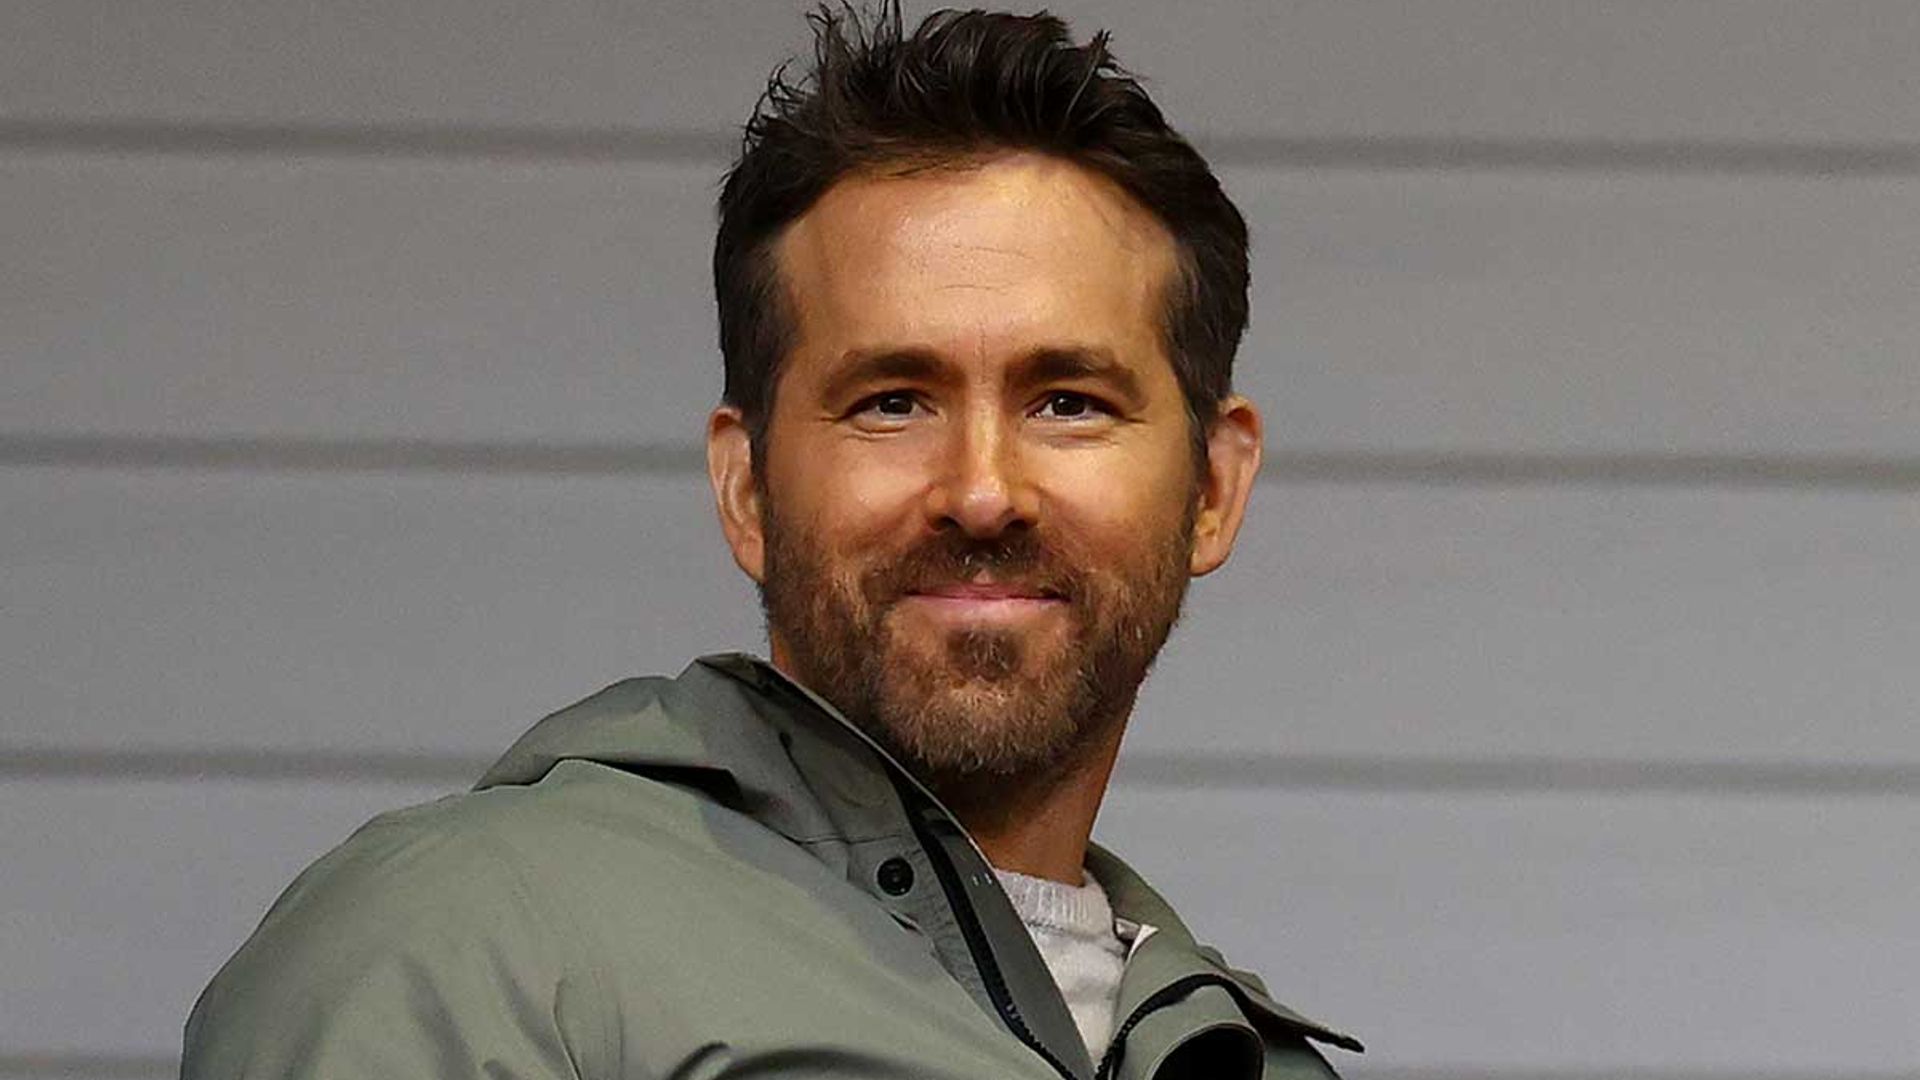 Blake Lively’s husband Ryan Reynolds posts competitive workout photo as fans weigh in